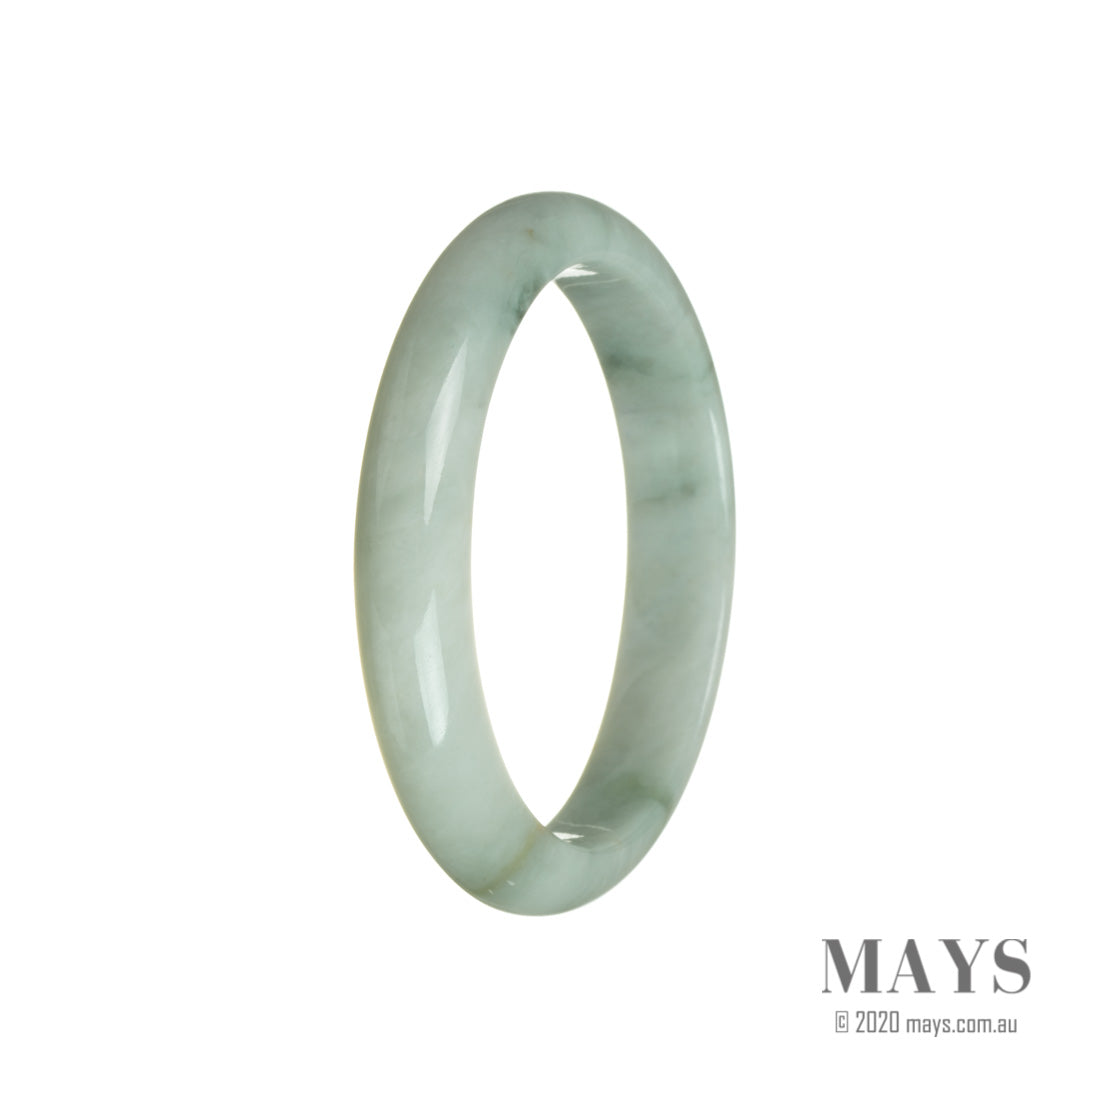 A close-up image of a green and grey Burma jade bangle bracelet. The bracelet is in the shape of a half moon and has a smooth, polished surface.